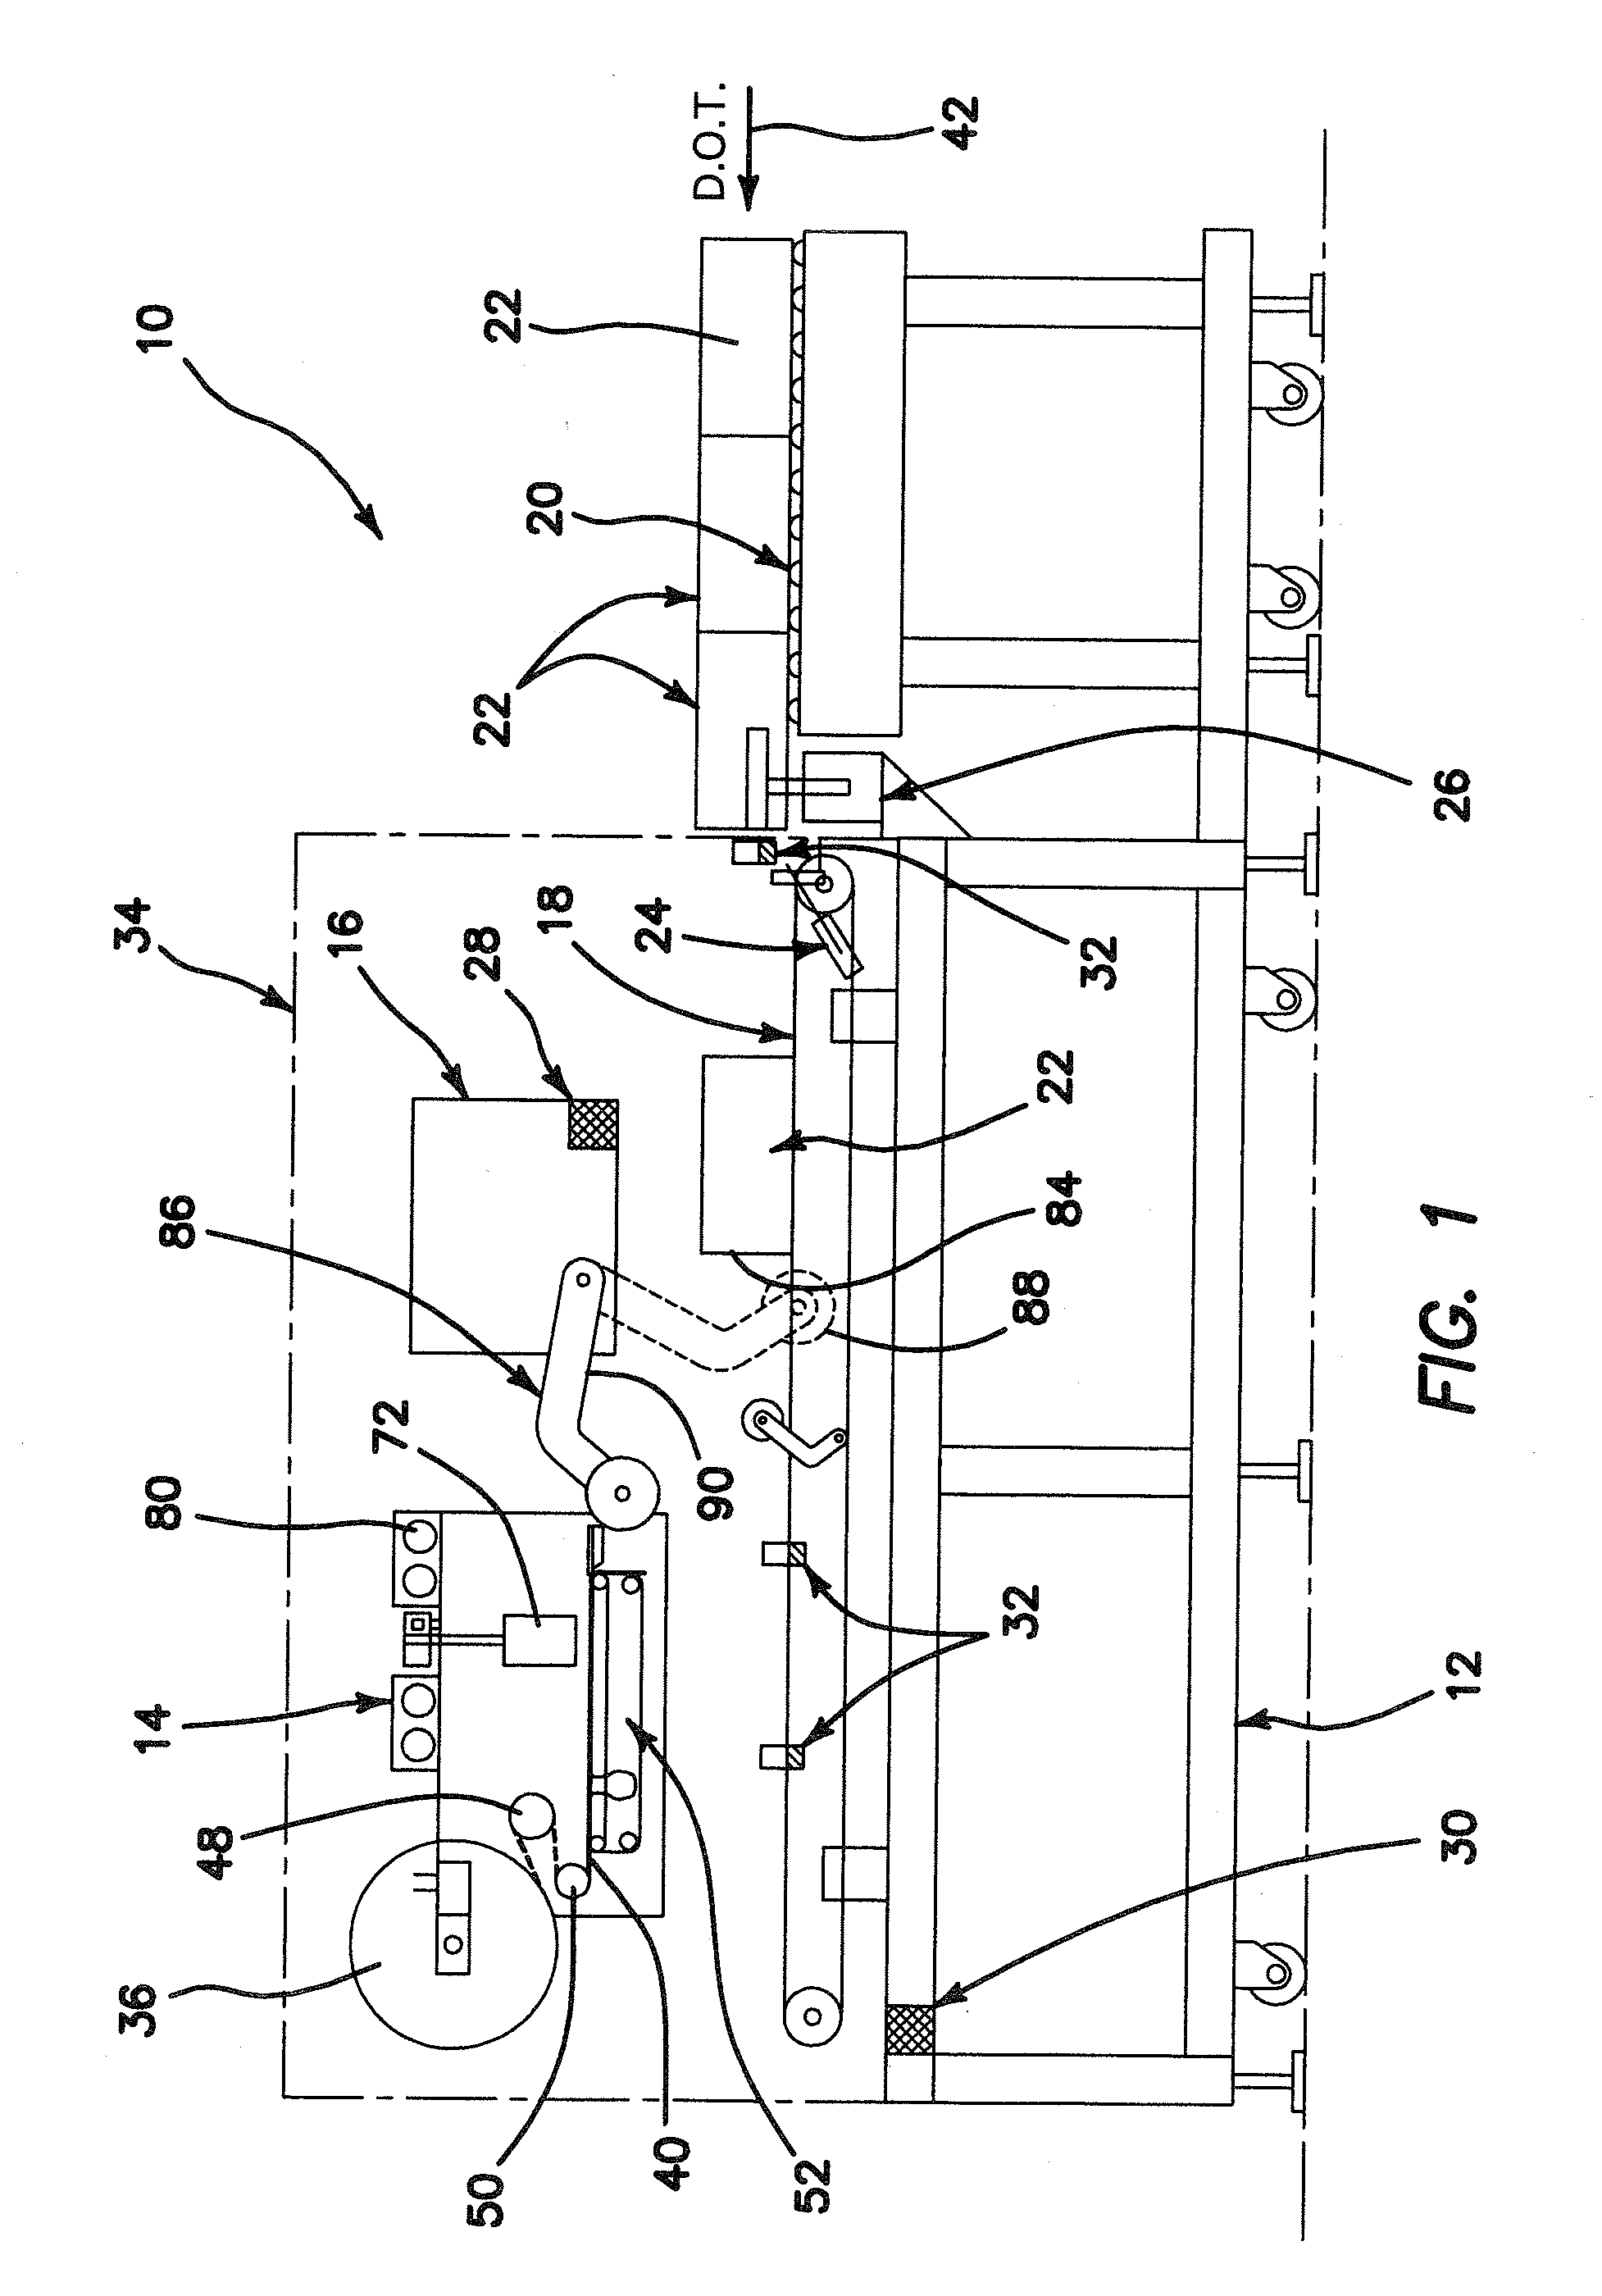 Devices and methods for applying adhesive liner-less security labels to articles